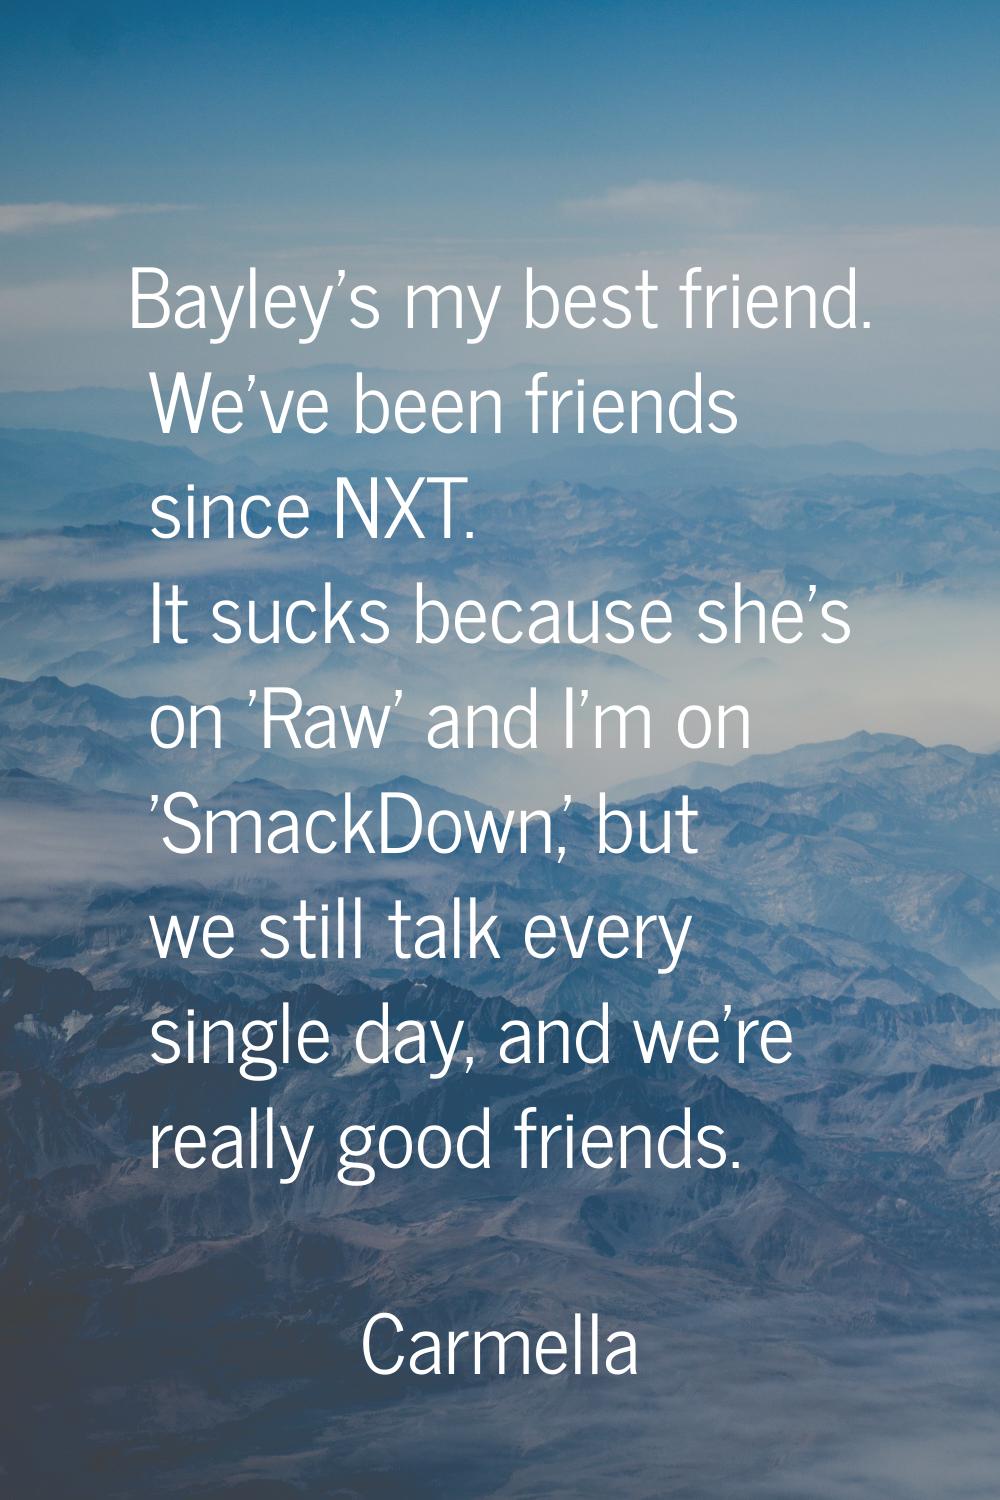 Bayley's my best friend. We've been friends since NXT. It sucks because she's on 'Raw' and I'm on '